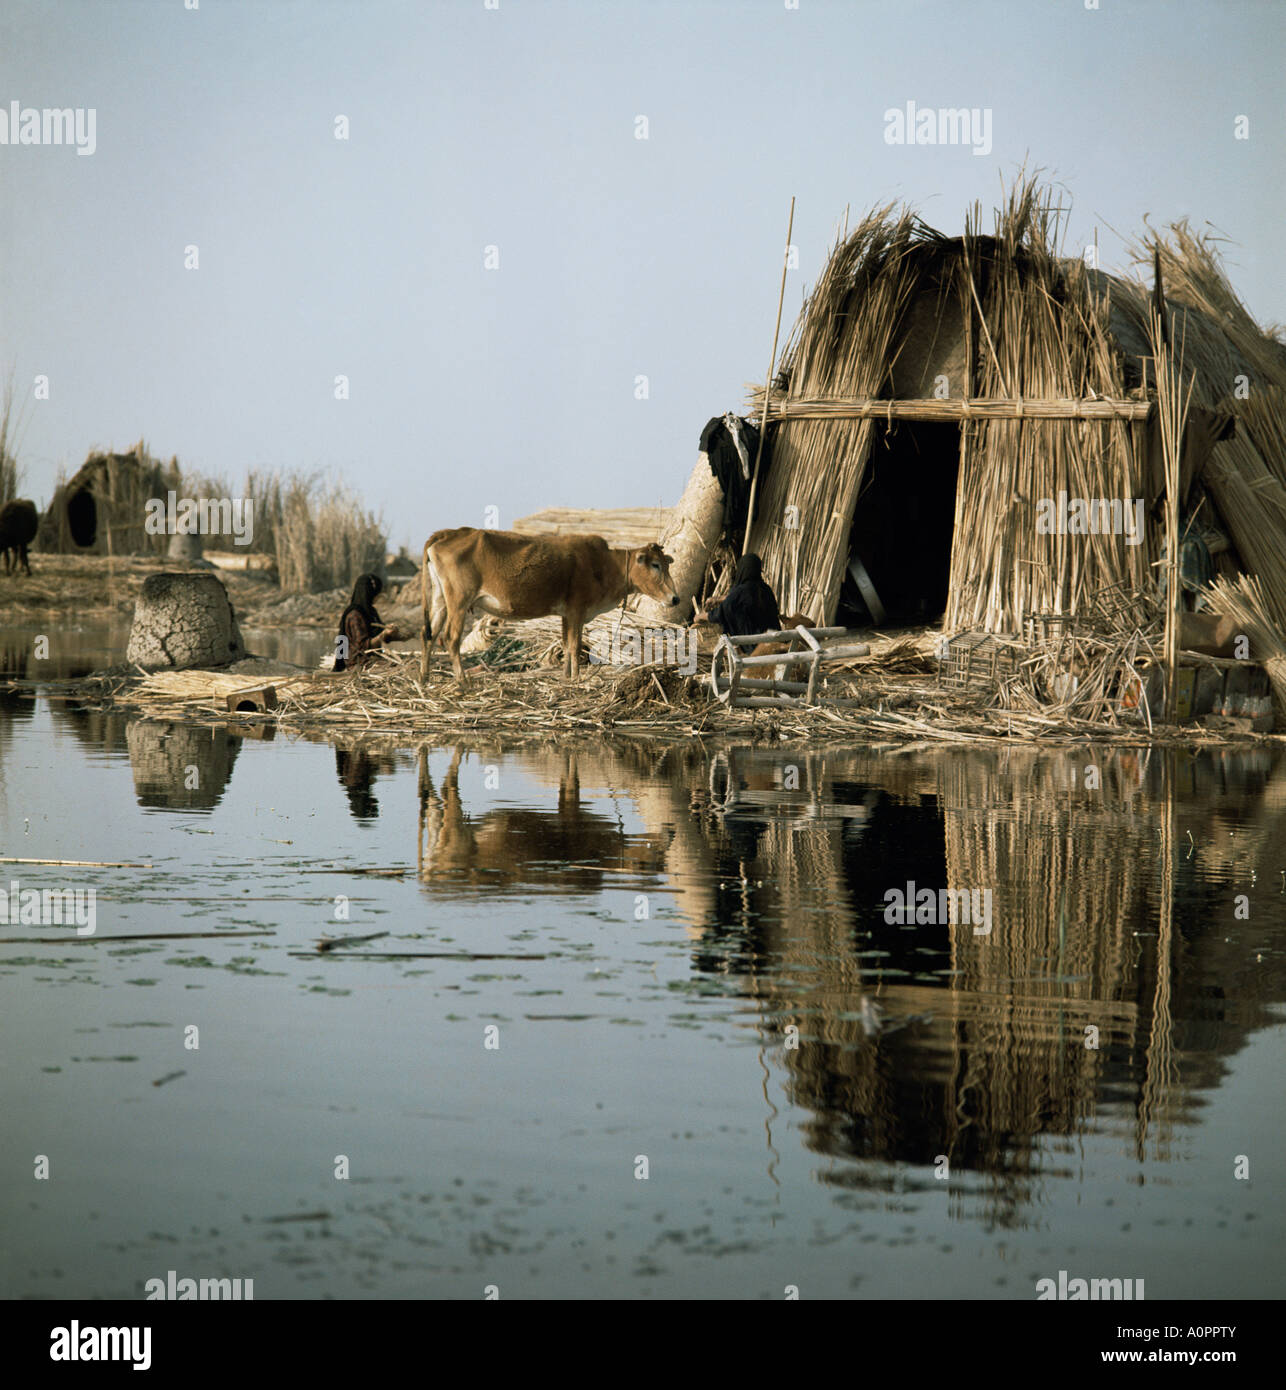 Village in the Marshes Iraq Middle East Stock Photo